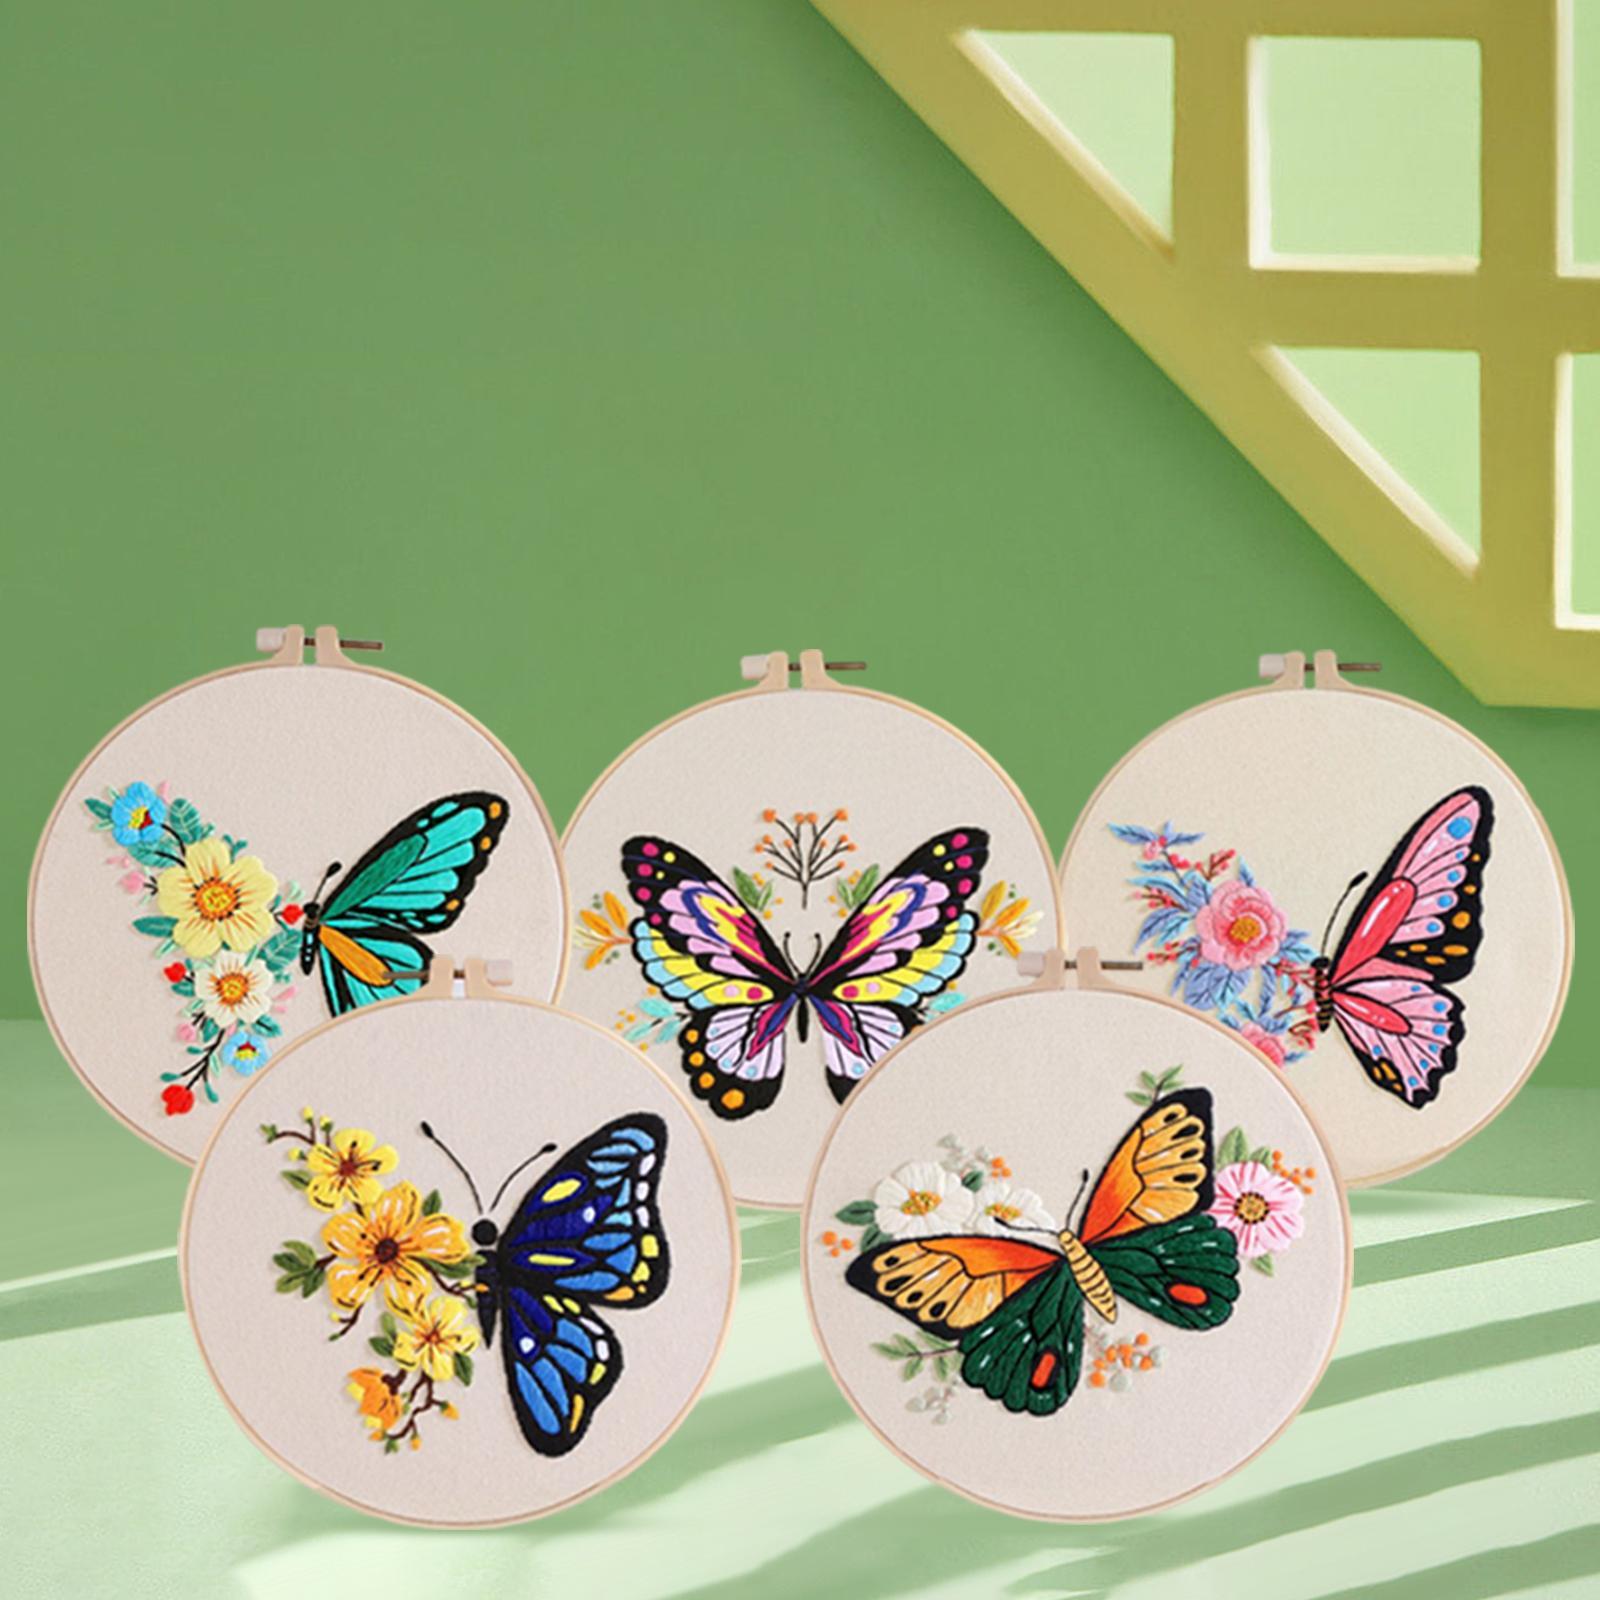 Embroidery Starter Kit Butterfly Flower Pattern with Embroidery ...